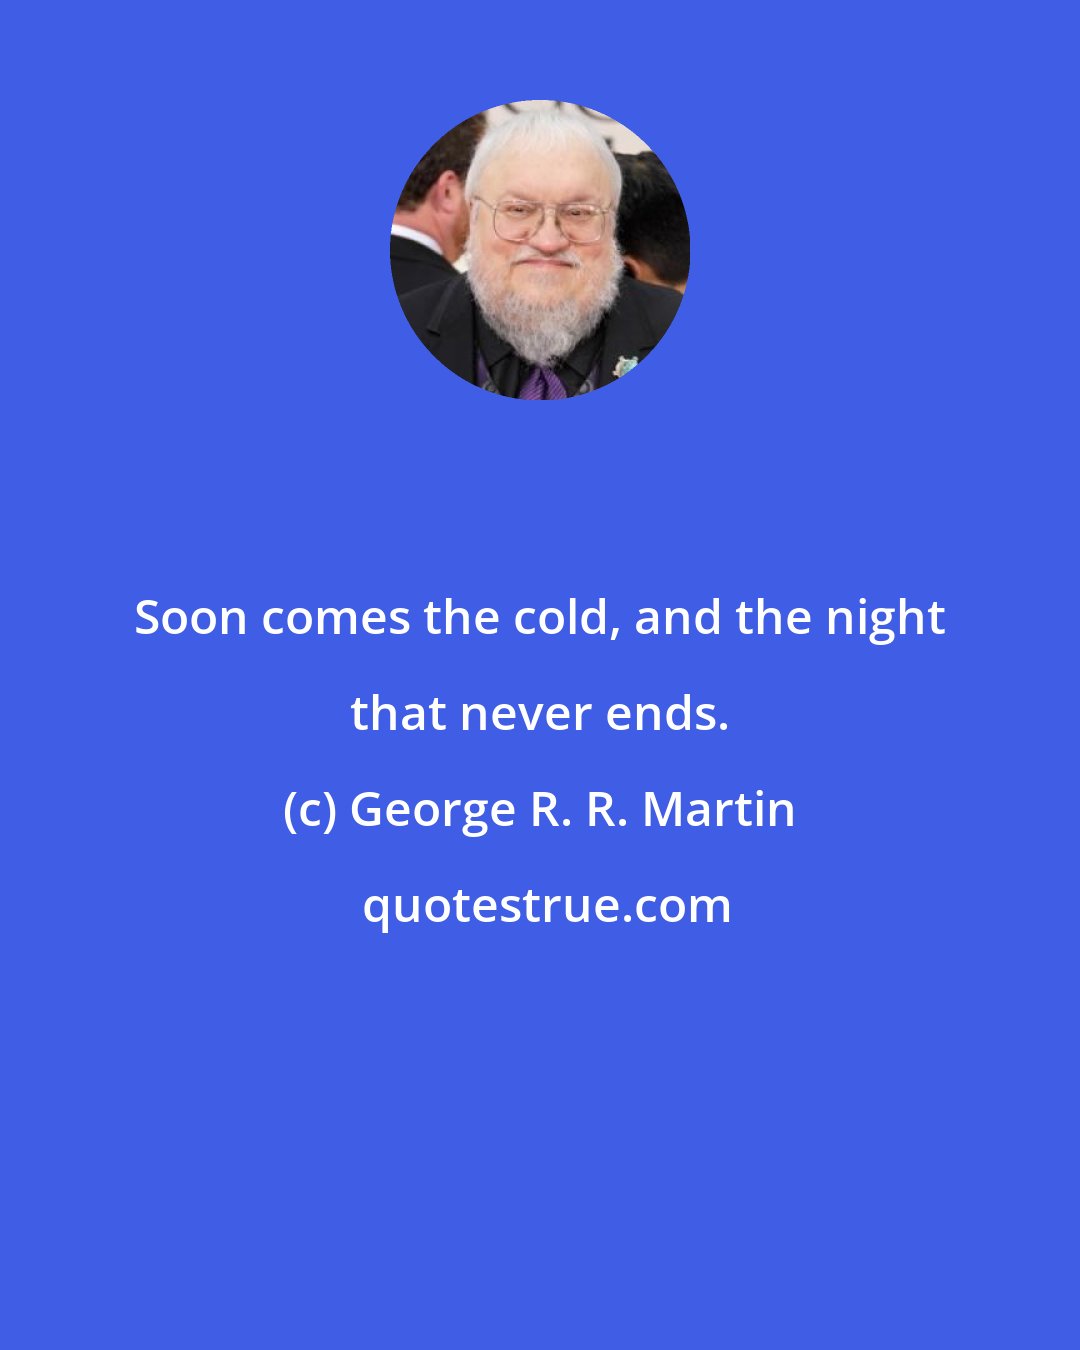 George R. R. Martin: Soon comes the cold, and the night that never ends.